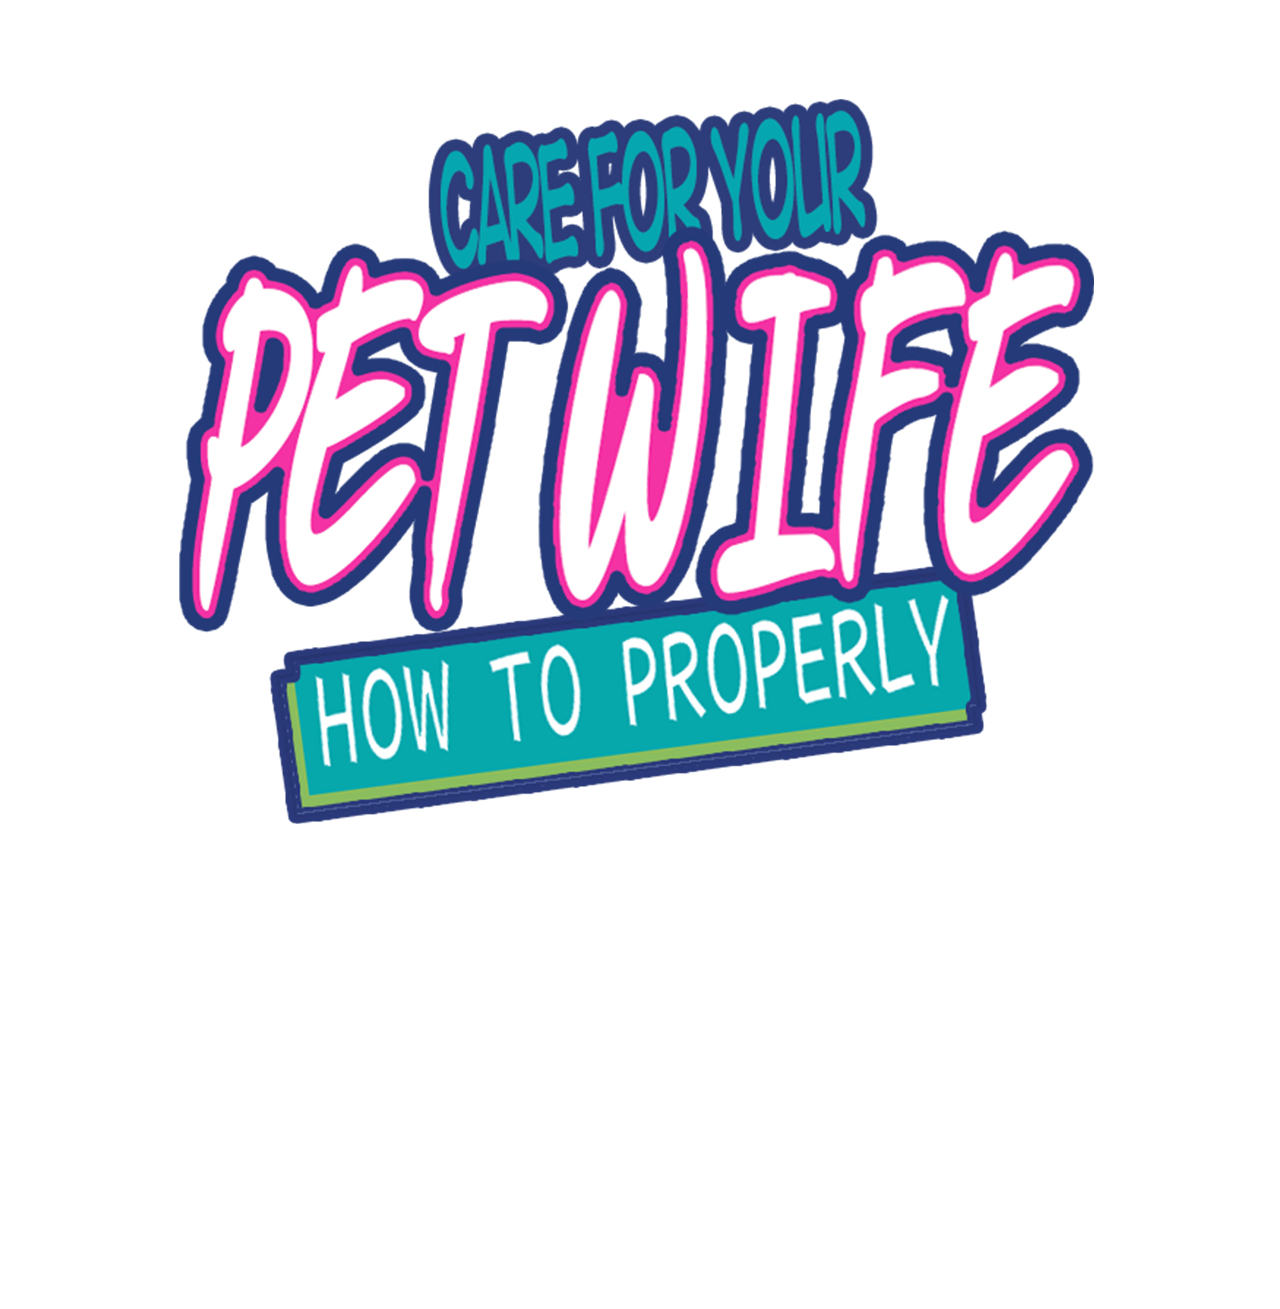 How To Properly Care For Your Pet Wife 25.1 Kesiya's Recollections